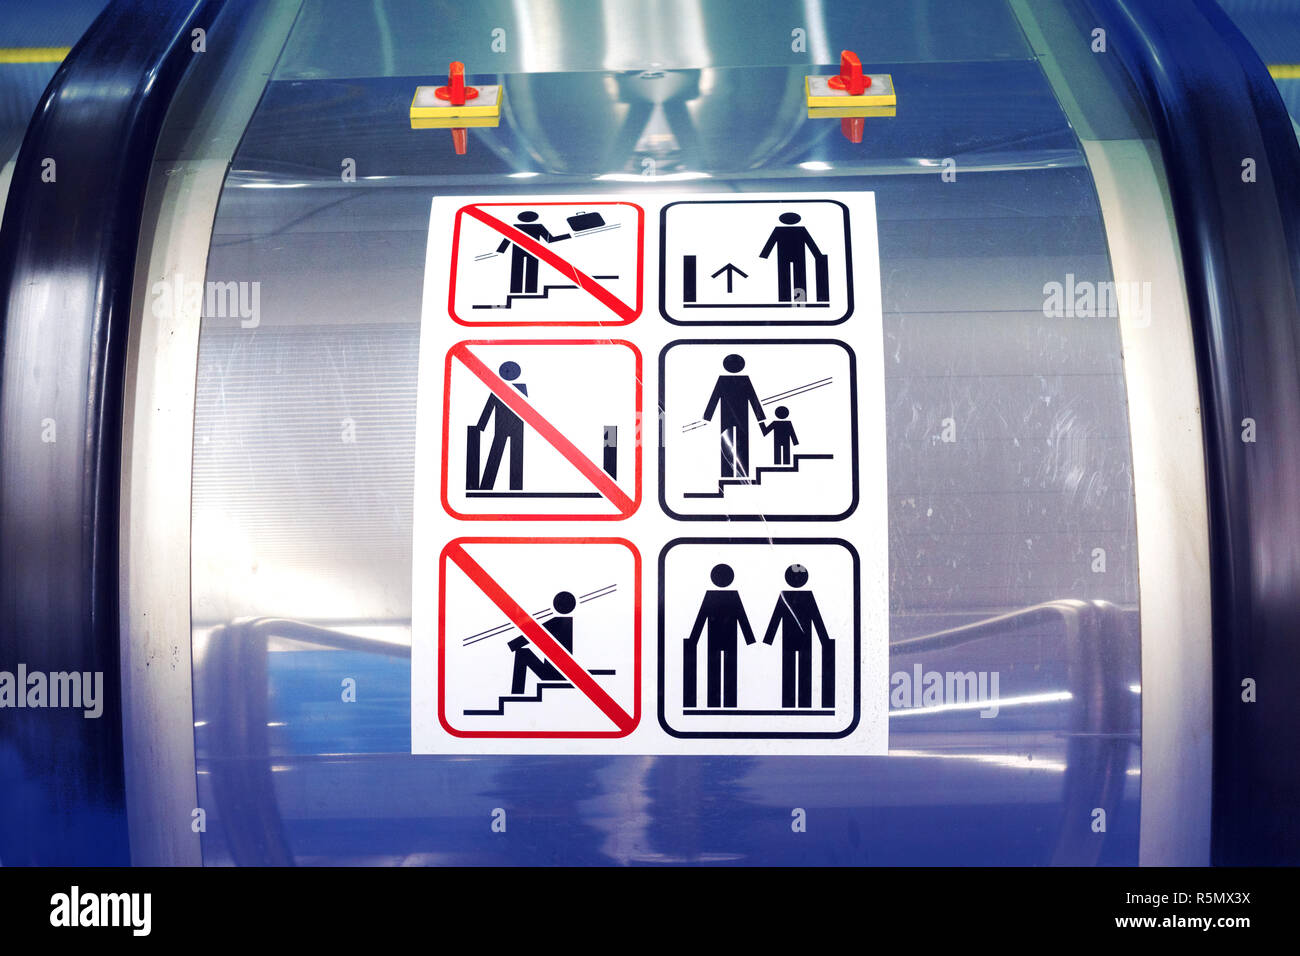 Signs on the escalator. Warning signs on the escalator in the metro Stock Photo